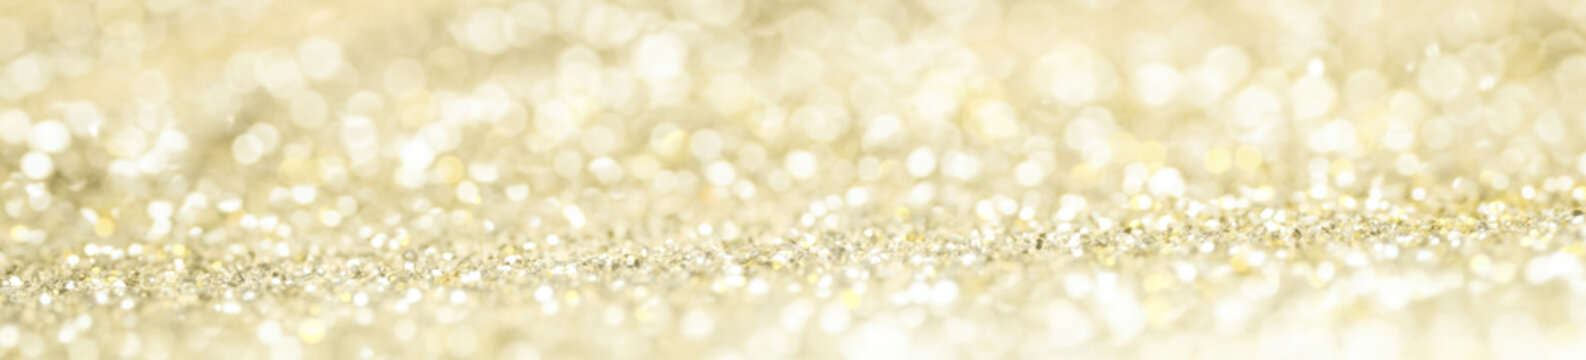 defocus of glitter vintage lights background and panorama. gold and silver for Christmas and new year background.